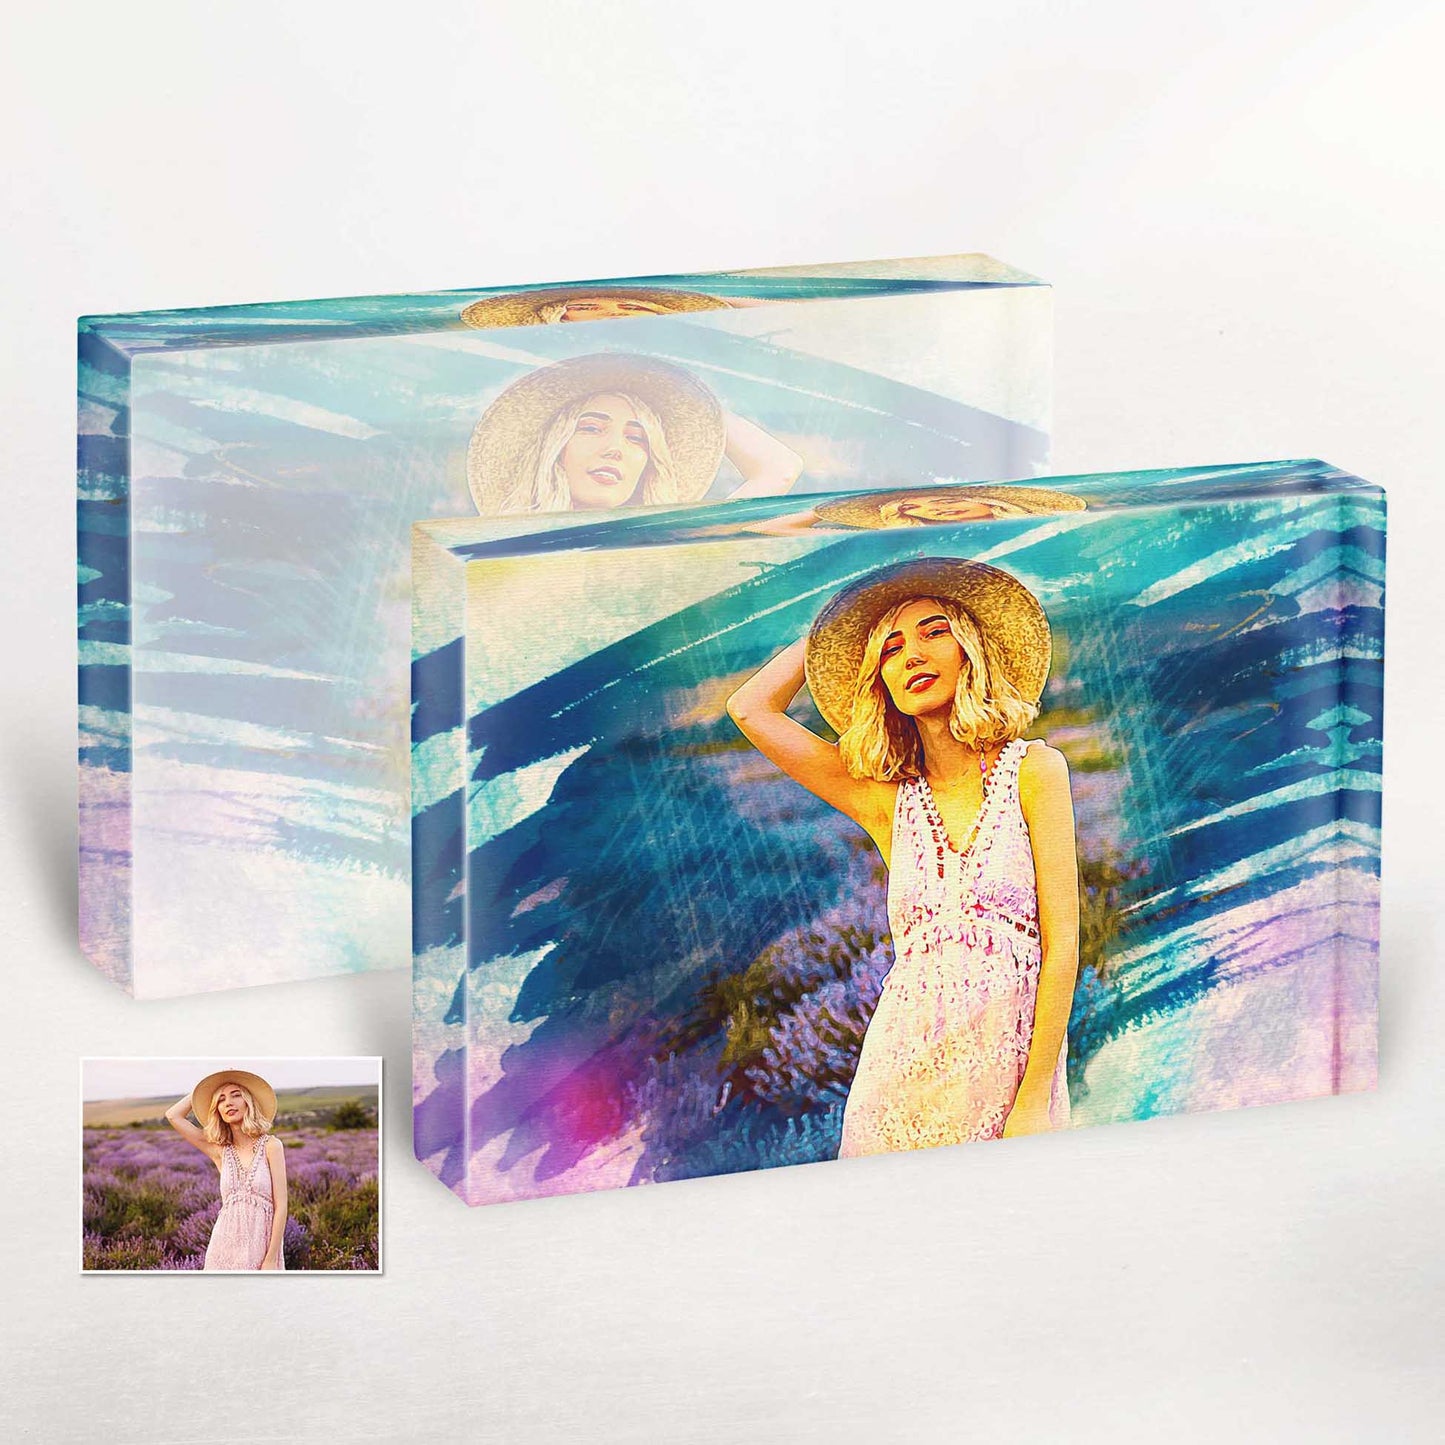 Anniversary Gift: Personalized Artistic Brush Painting Acrylic Block Photo: Commemorate your special day with a personalized watercolor-inspired acrylic block photo. Its cool and colorful aesthetic